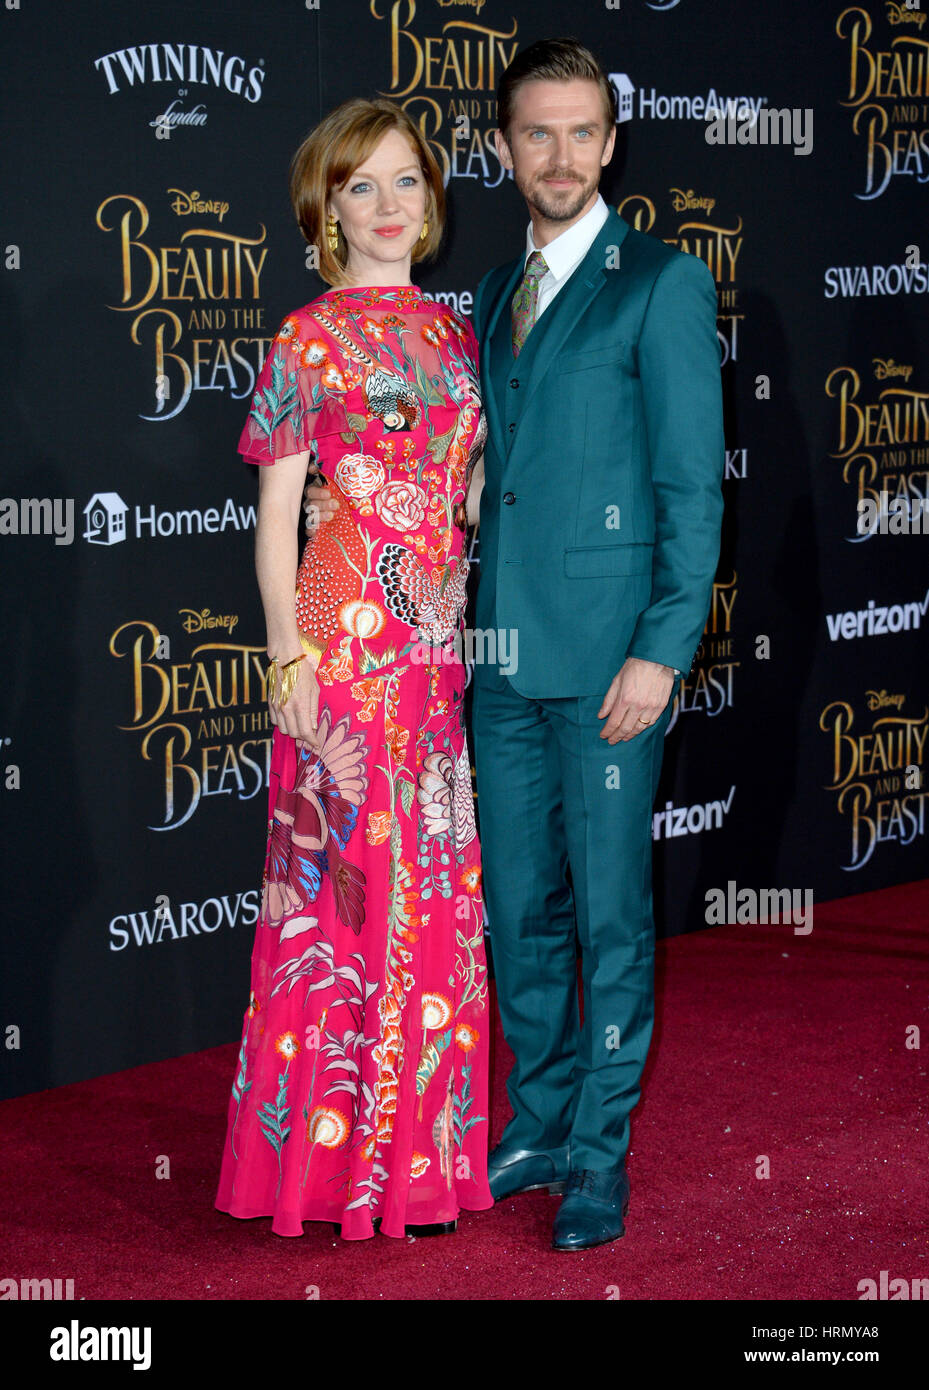 Los Angeles, USA. 02nd Mar, 2017. Actor Dan Stevens & wife Susie Hariet at the premiere for Disney's 'Beauty and the Beast' at the El Capitan Theatre, Hollywood. Picture Credit: Sarah Stewart/Alamy Live News Stock Photo